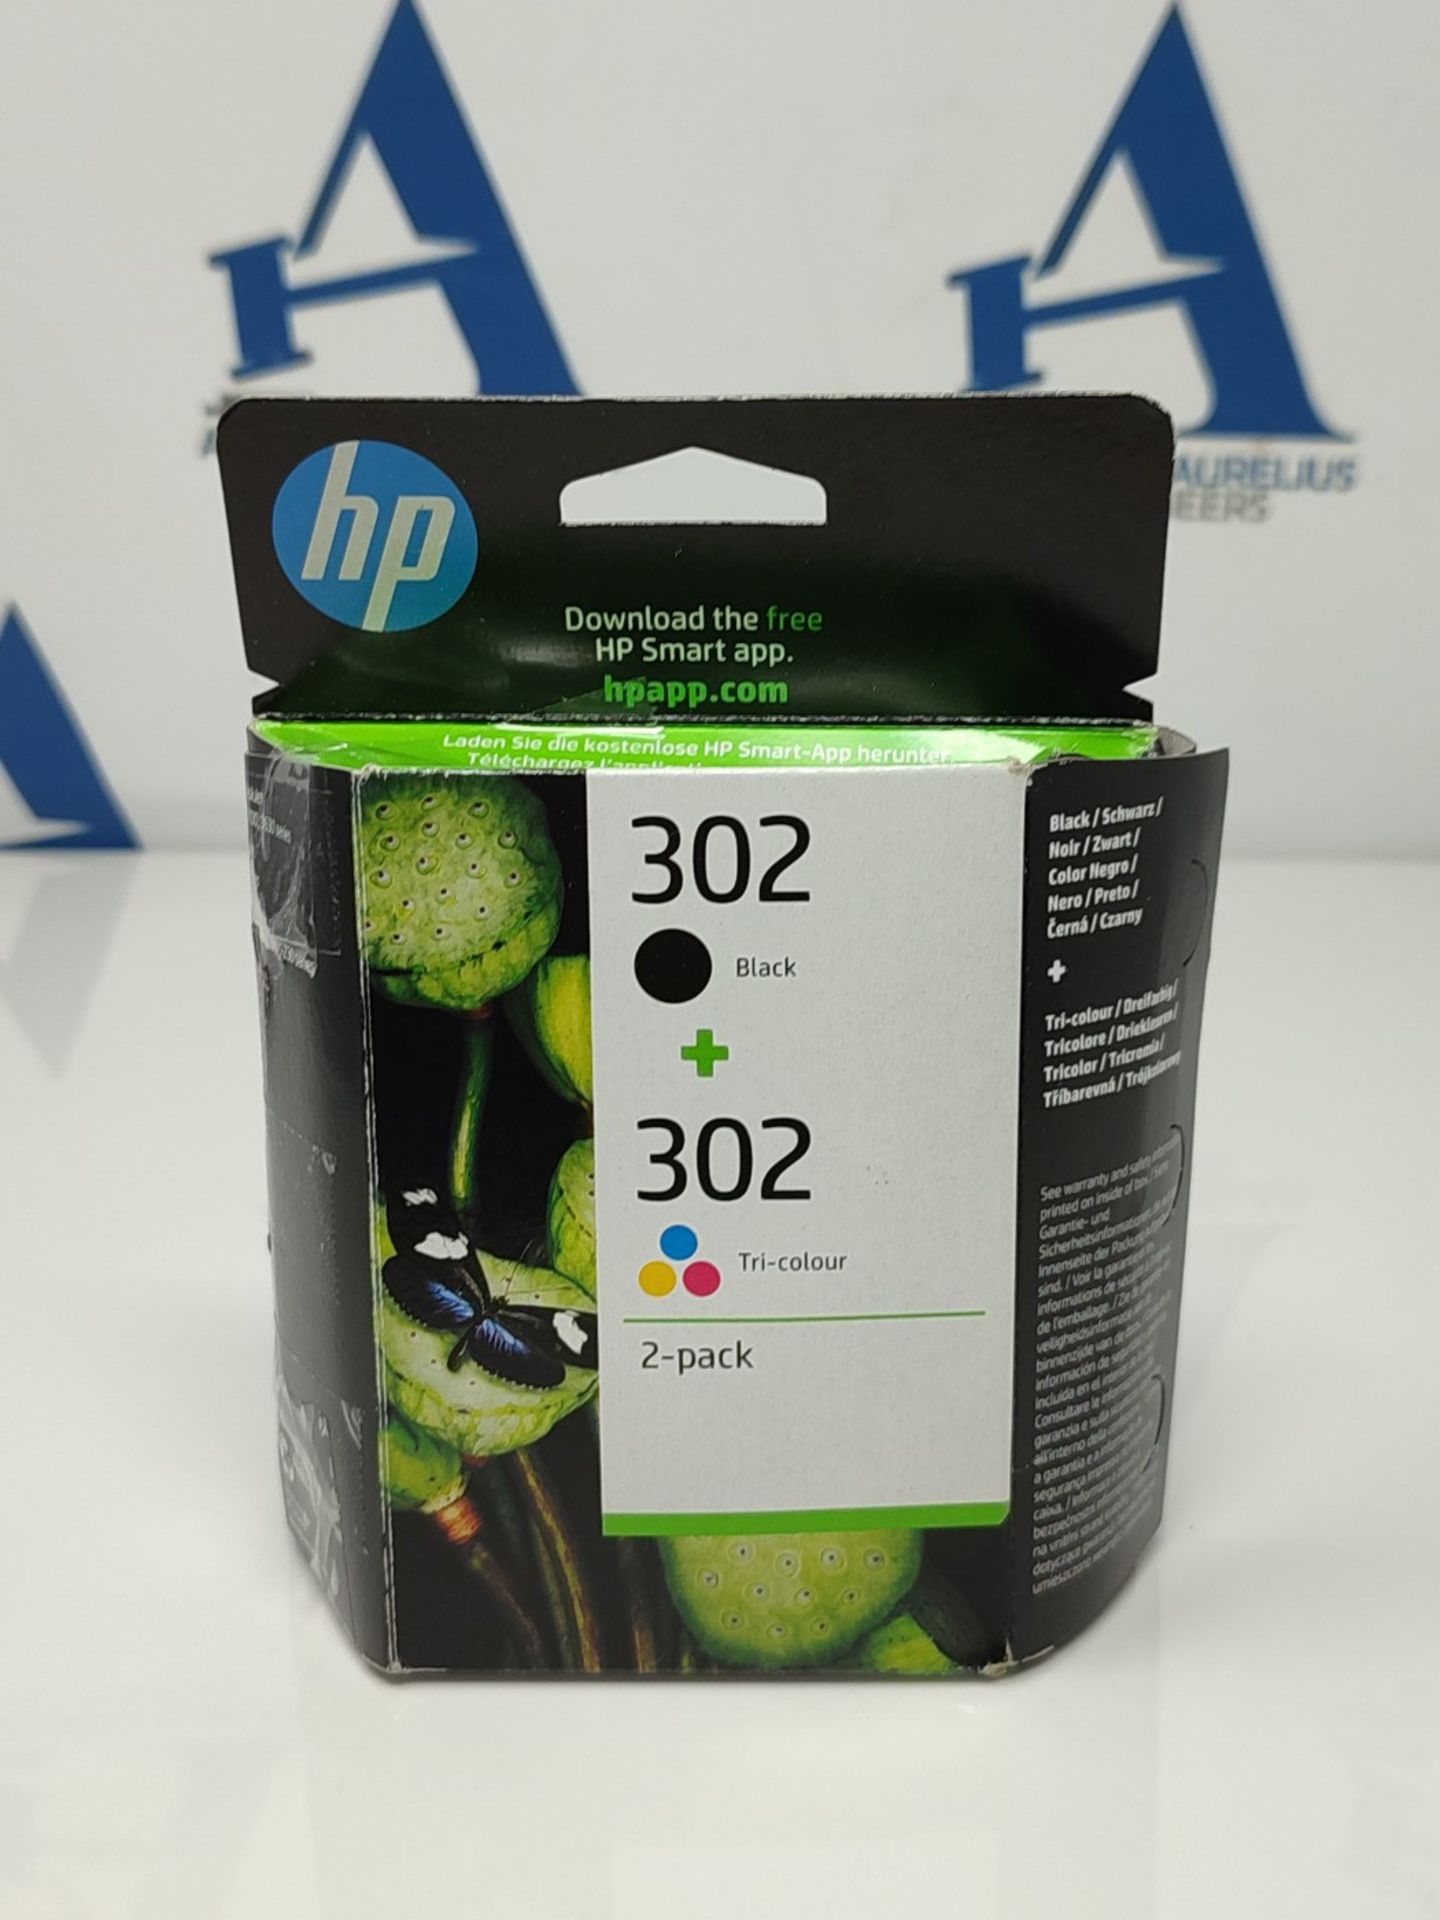 HP X4D37AE 302 Original Ink Cartridges, Black and Tri-color, 2 Count (Pack of 1) - Image 2 of 3